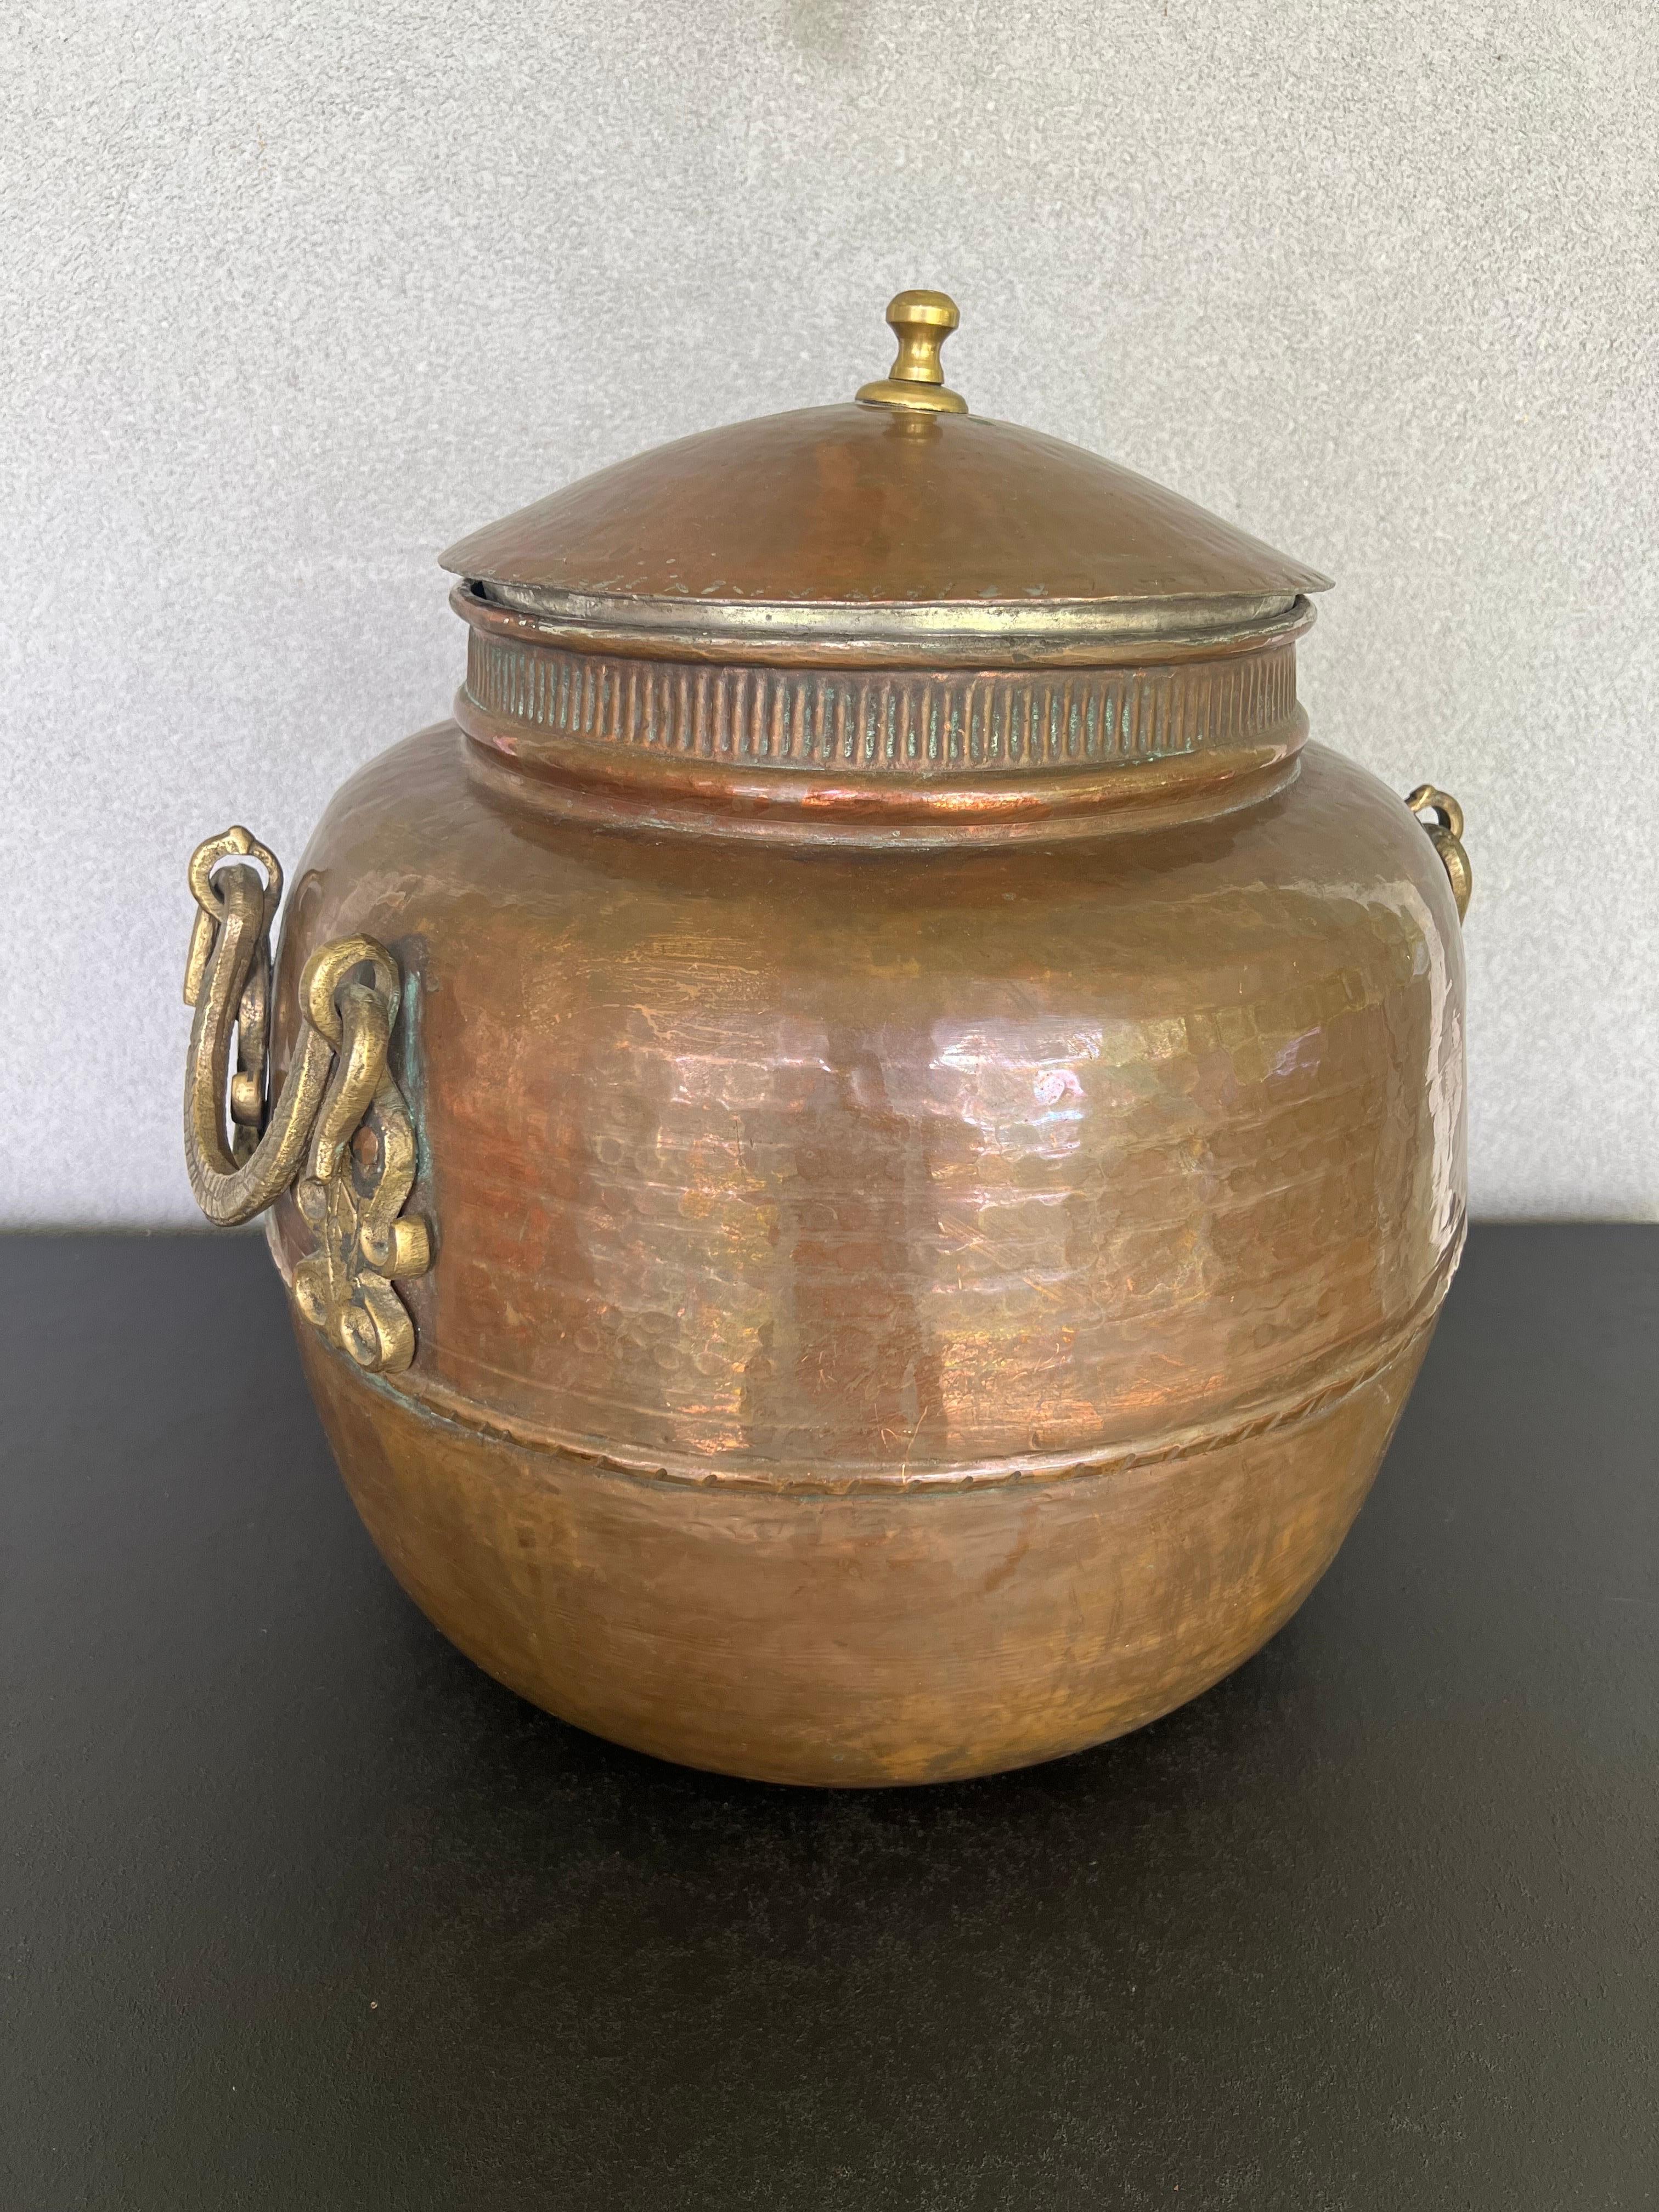 Large Antique Lidid Copper Pot/Cauldron Made in Turkey   In Good Condition For Sale In Fort Washington, MD